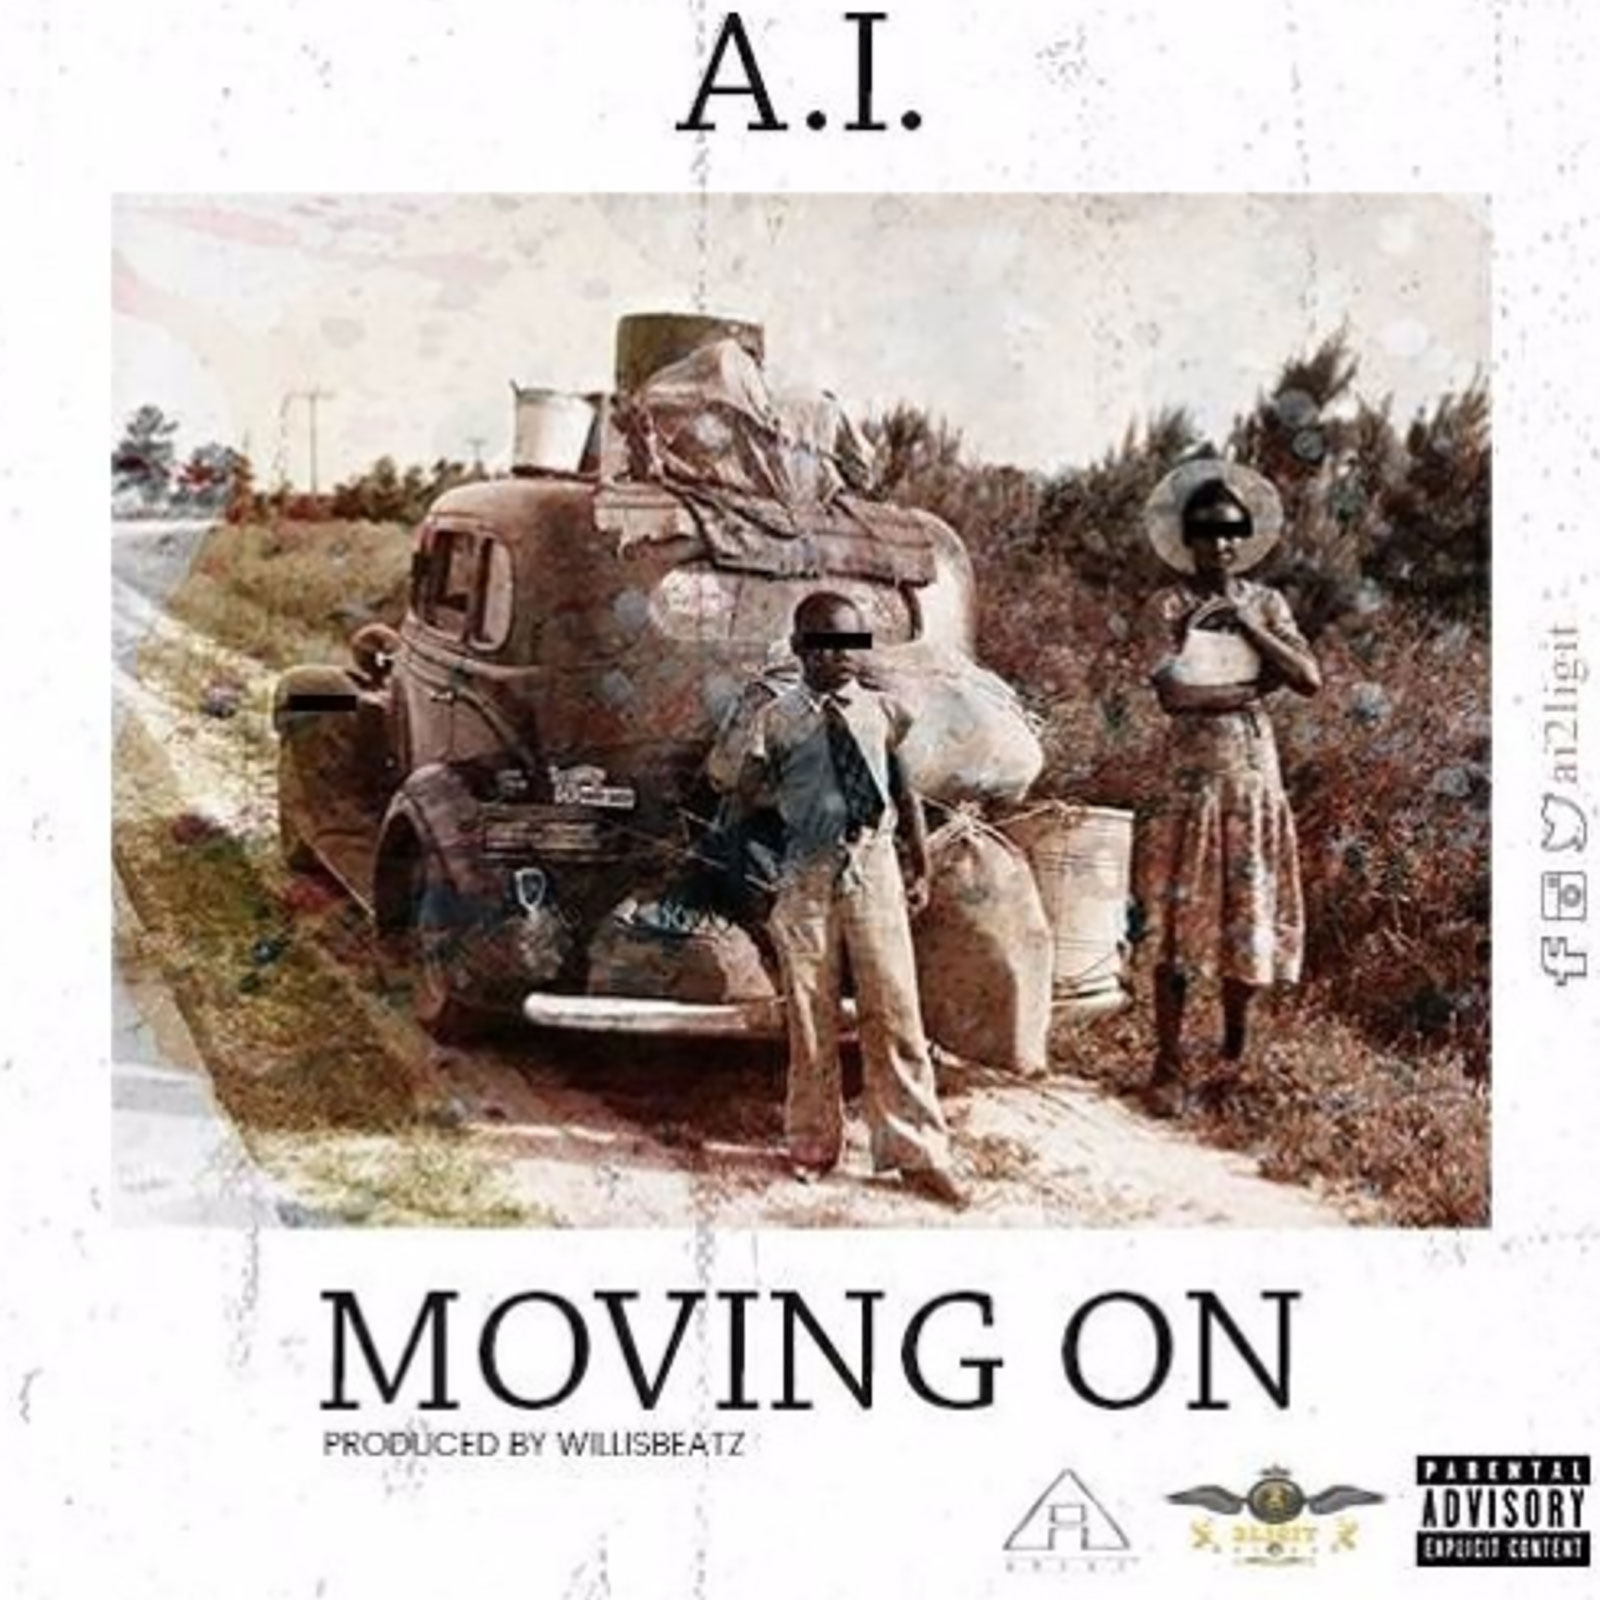 Moving On by A.I.